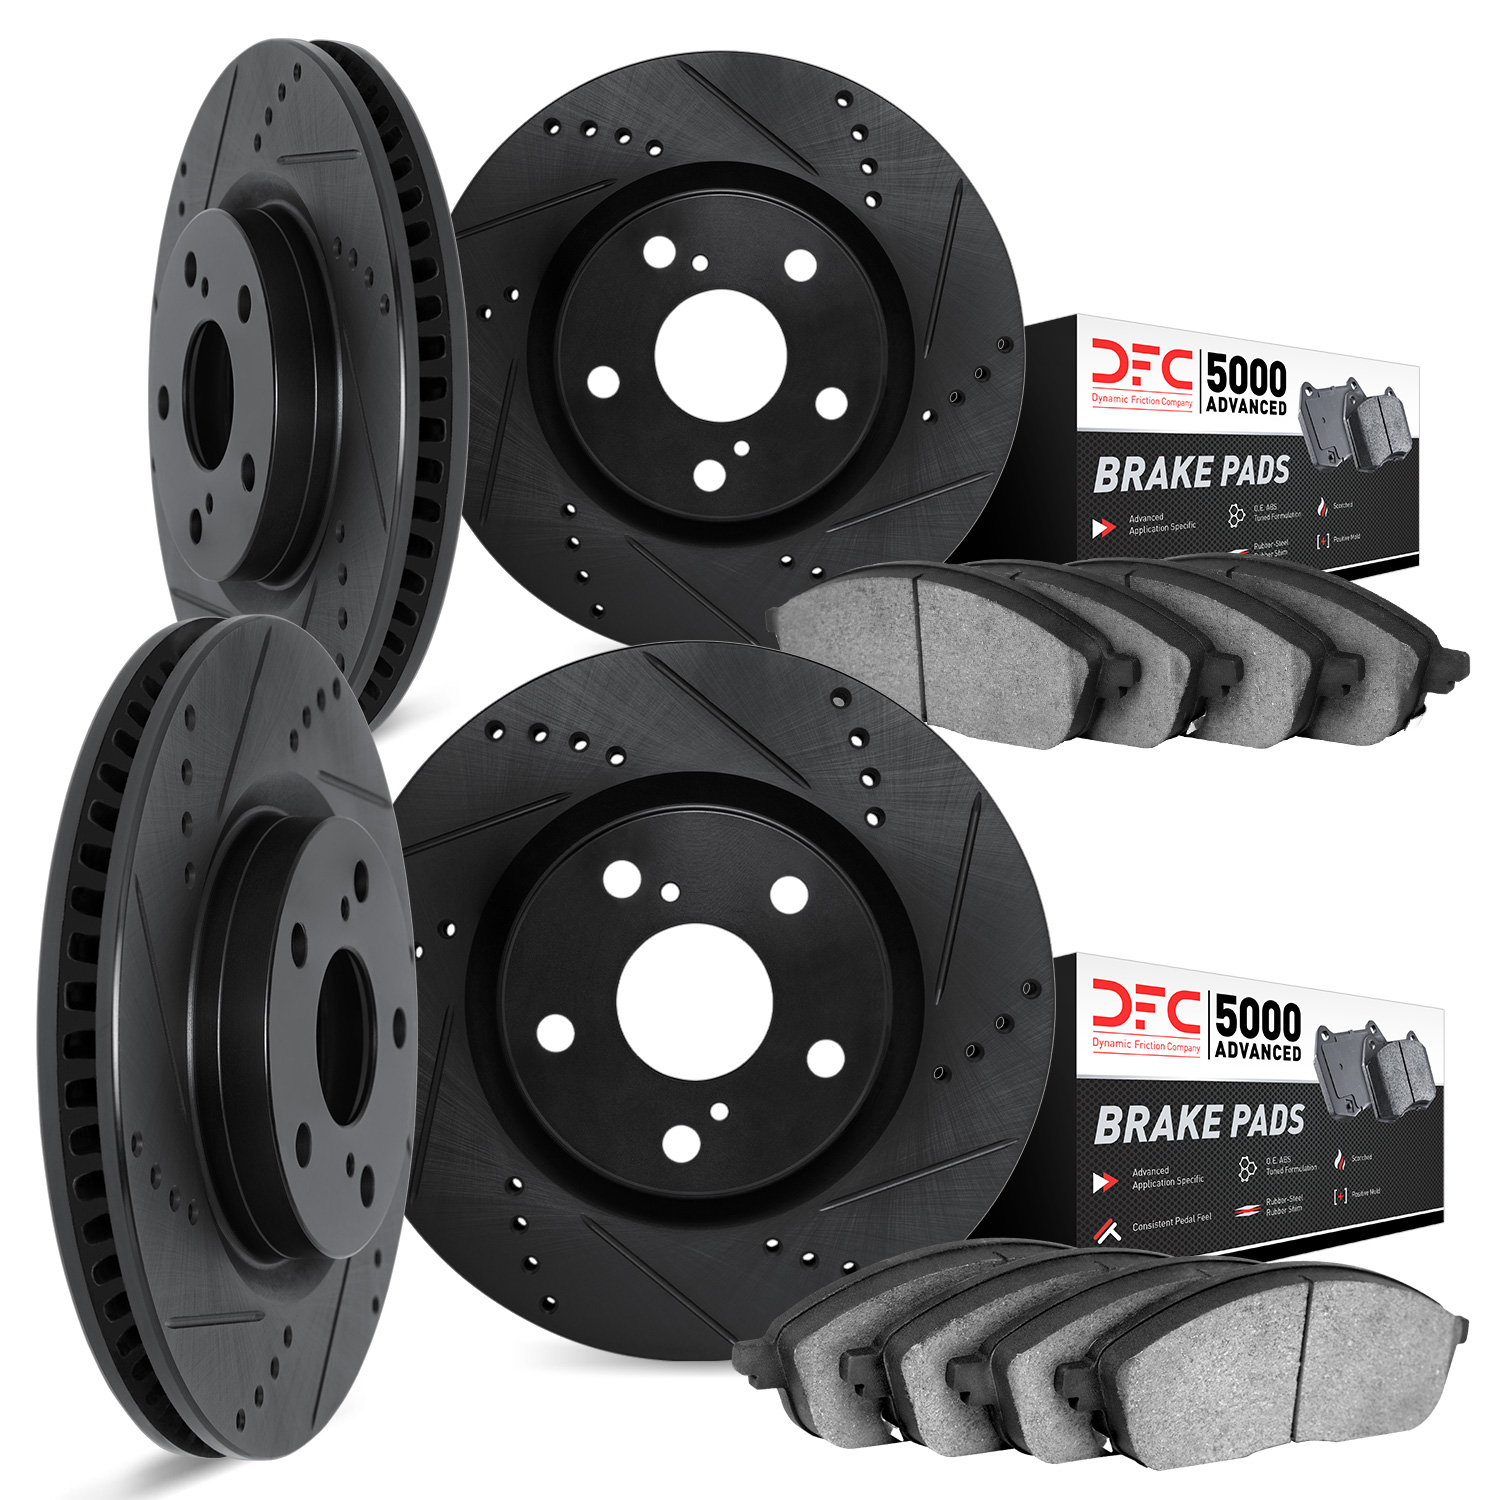 8504-13009 Drilled/Slotted Brake Rotors w/5000 Advanced Brake Pads Kit [Black], 2008-2020 Subaru, Position: Front and Rear